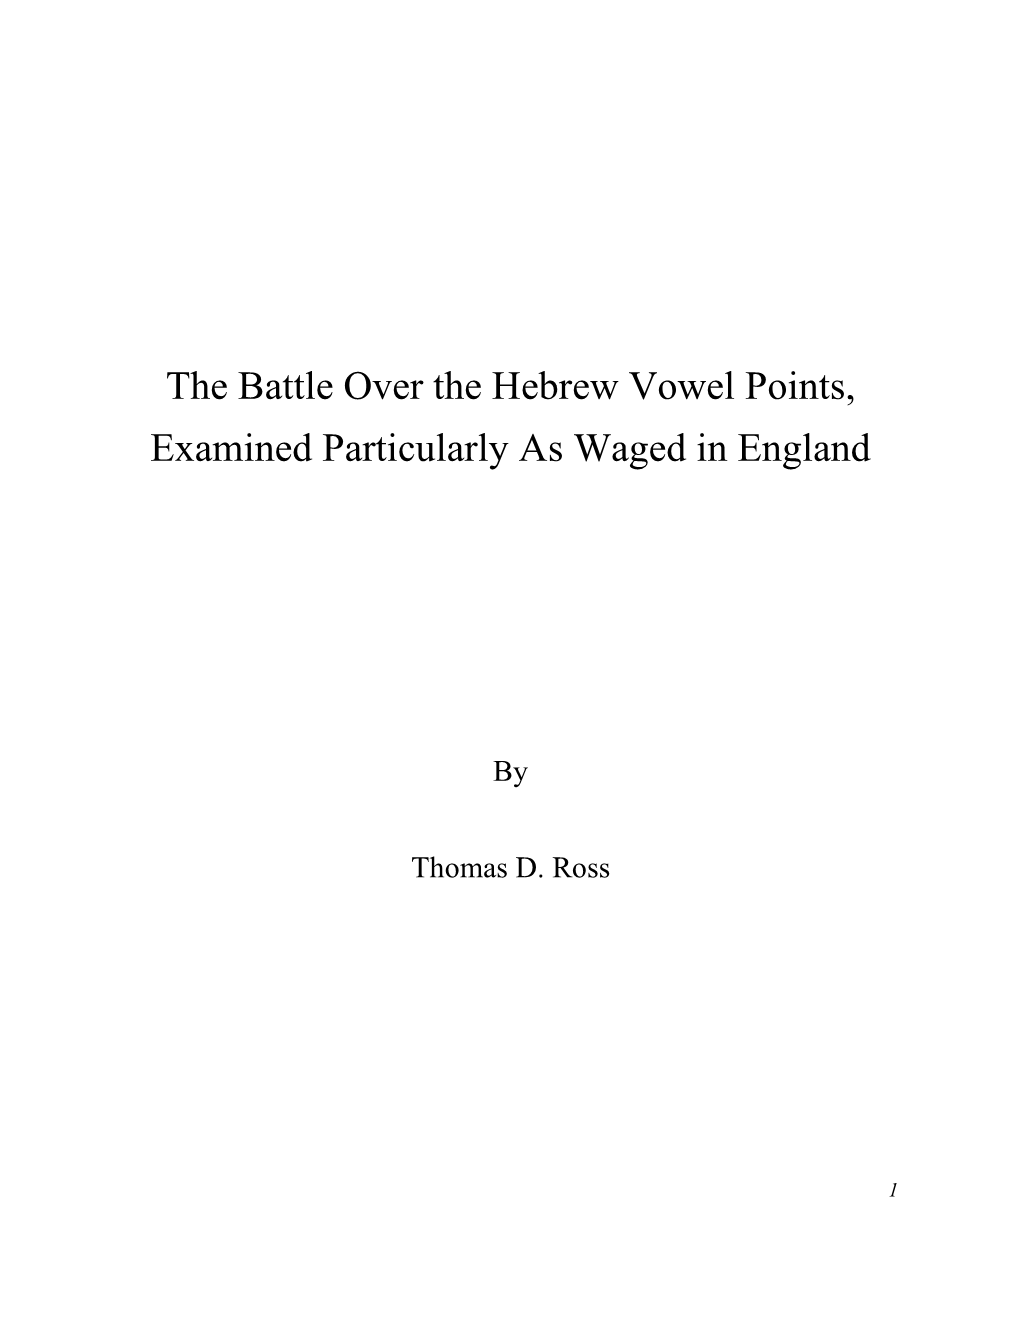 The Battle Over the Hebrew Vowel Points, Examined Particularly As Waged in England